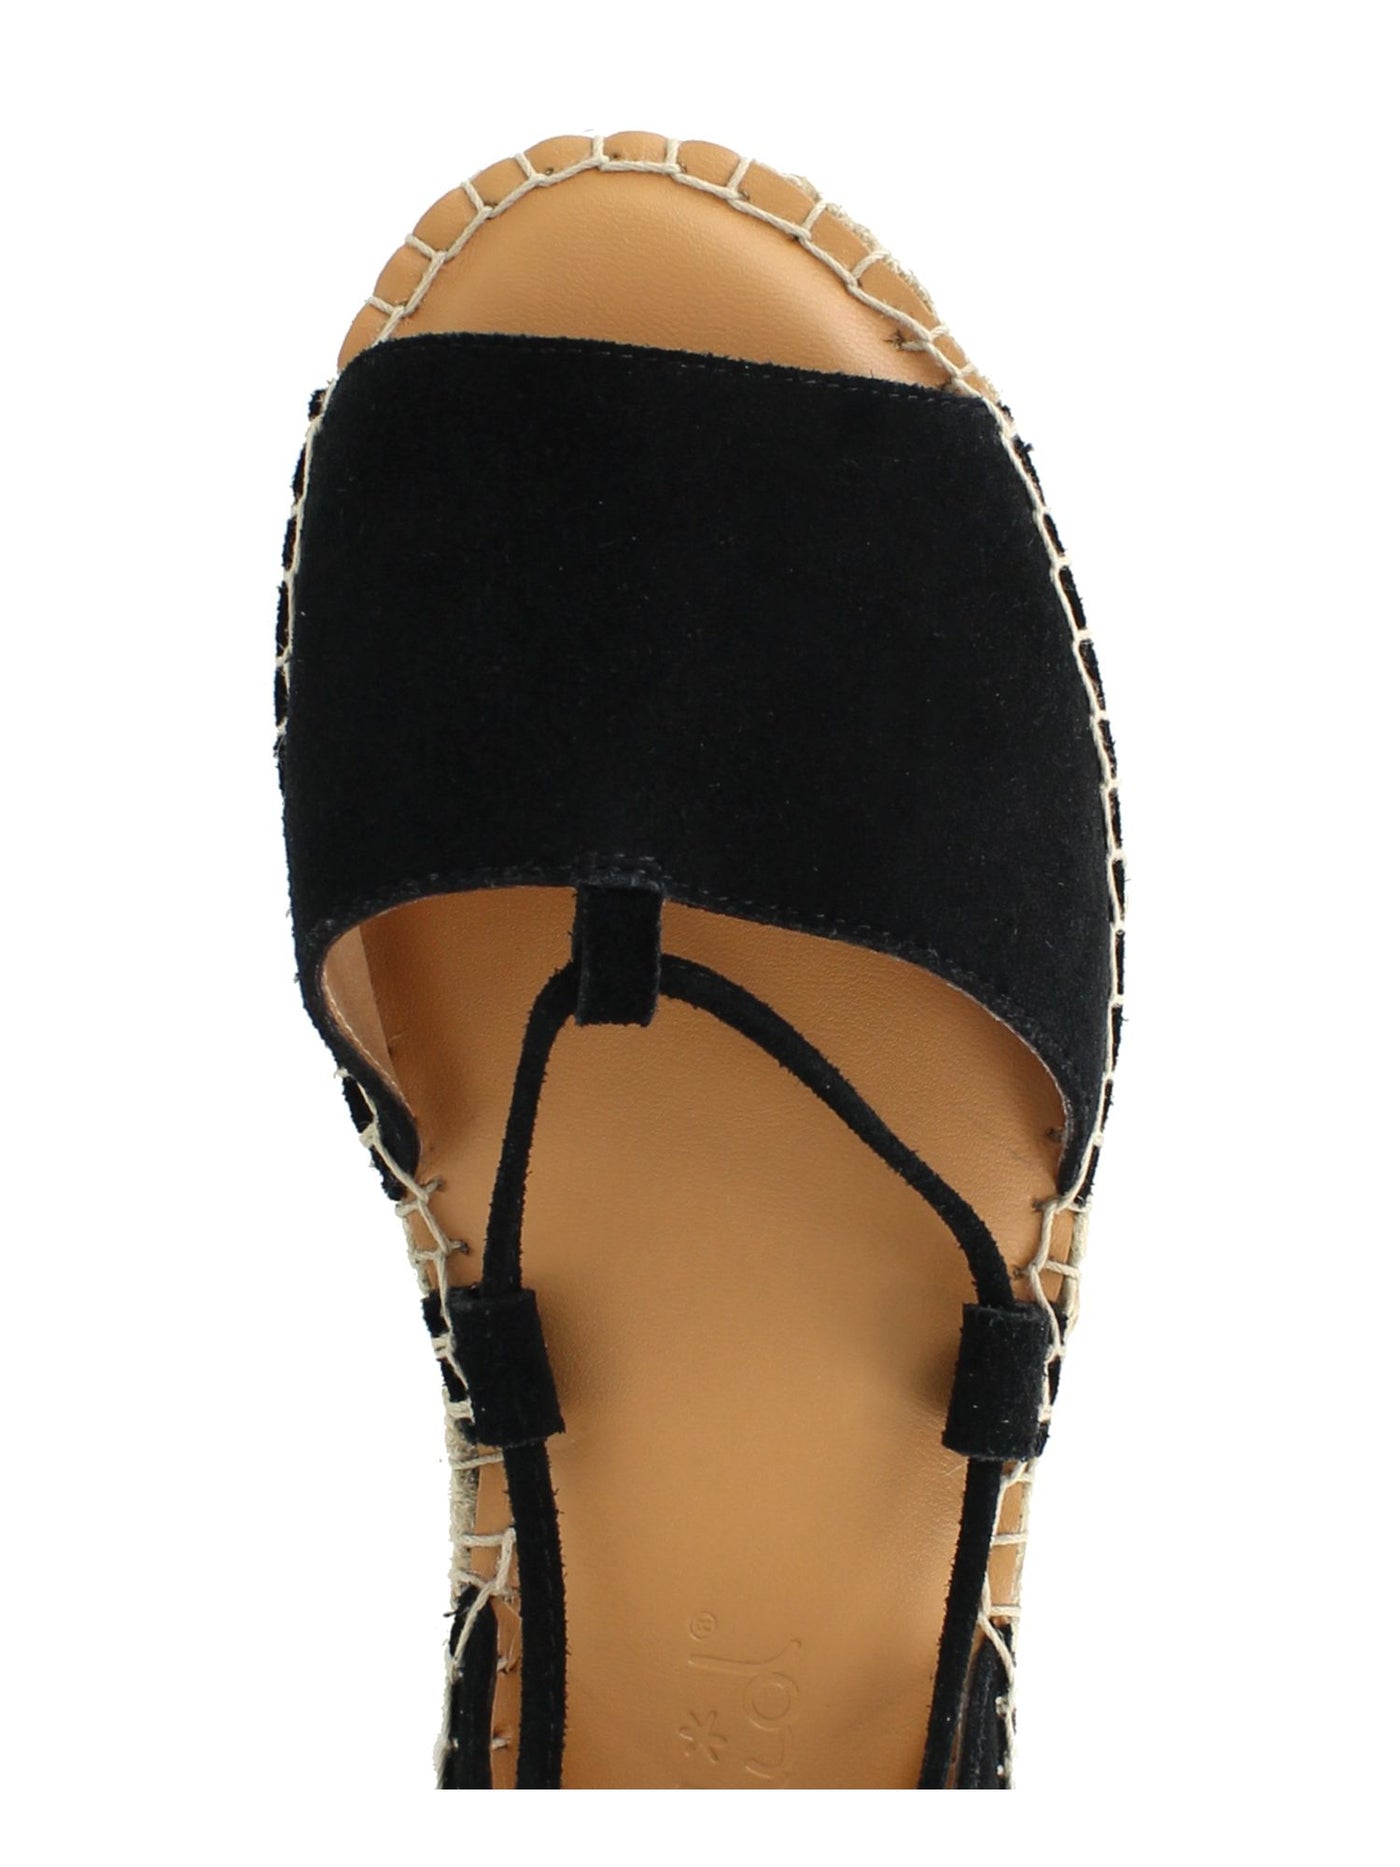 SPLENDID Womens Black Strappy Meredith Round Toe Platform Lace-Up Leather Espadrille Shoes 7.5 M